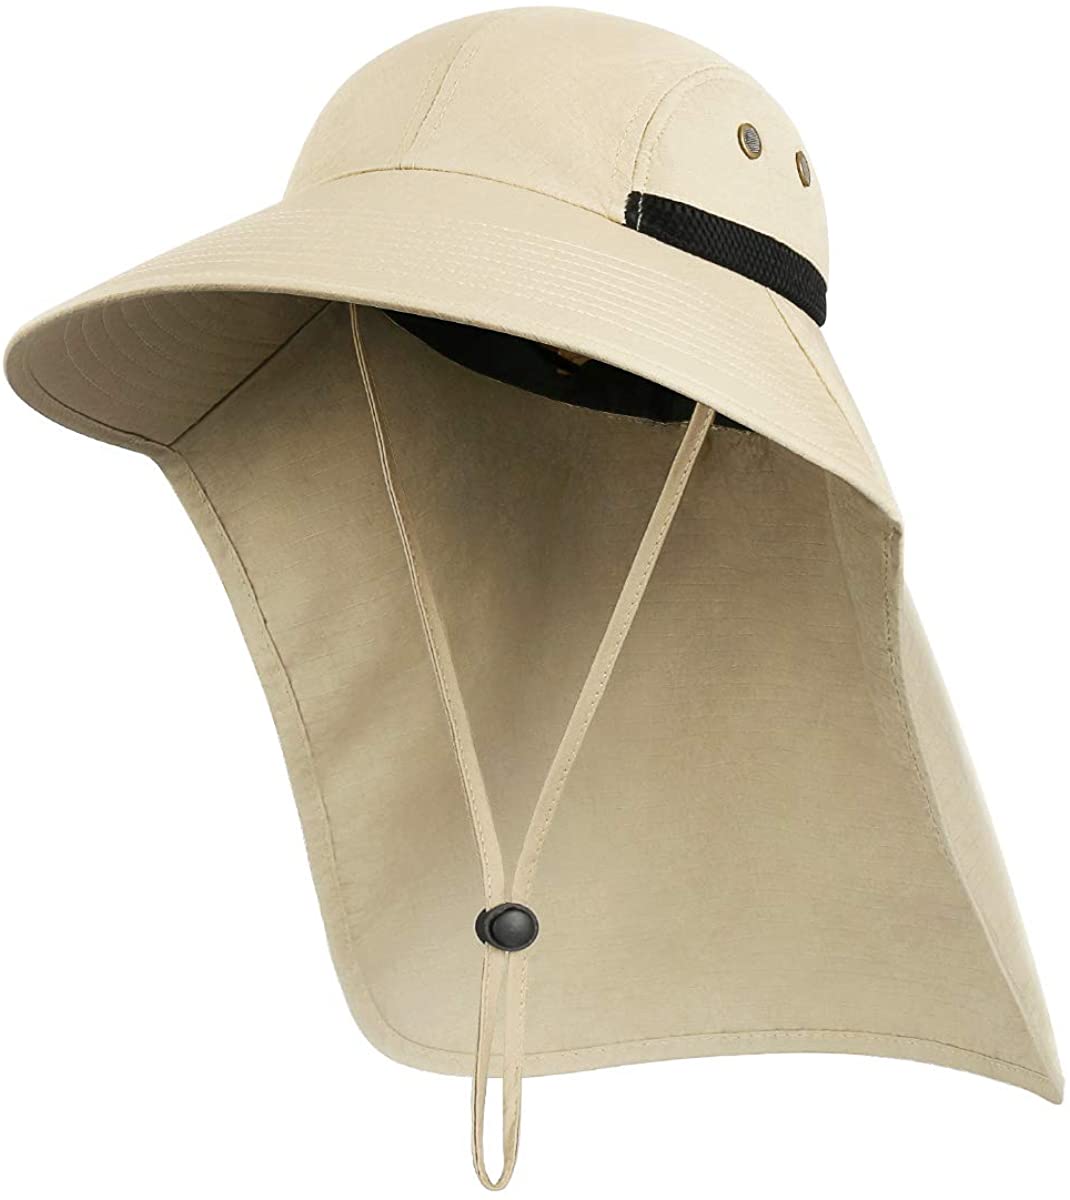 Buy Outdoor Sun Hat for Men with 50+ UPF Protection Safari Cap Wide Brim  Fishing Hat with Neck Flap, for Dad-PURE COTTON-NAVY Online